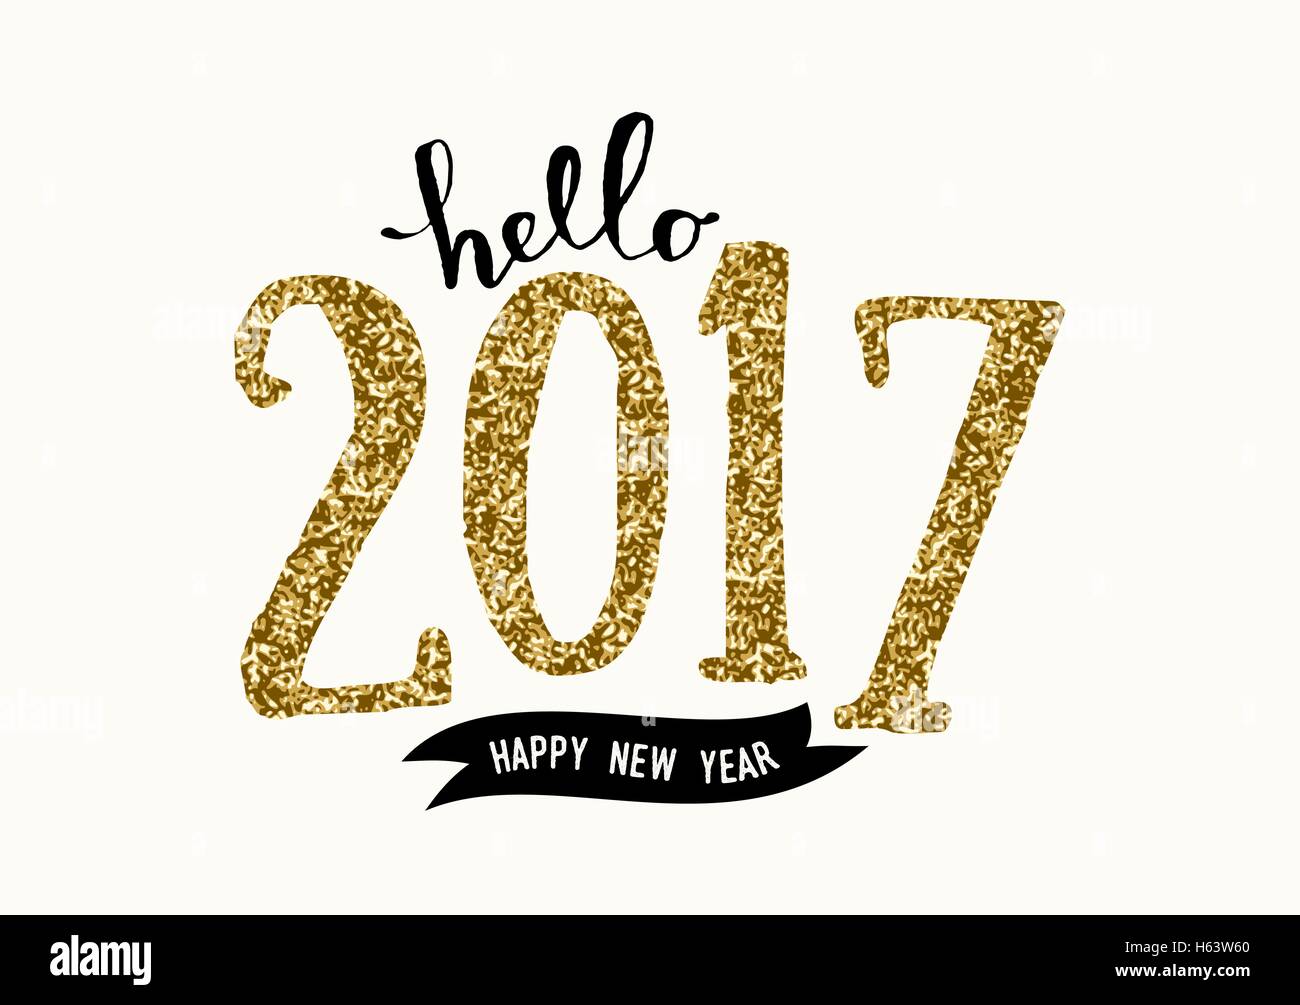 Typographic design greeting card template with text 'Hello 2017 Happy New Year'. Modern style poster, greeting card, postcard de Stock Vector